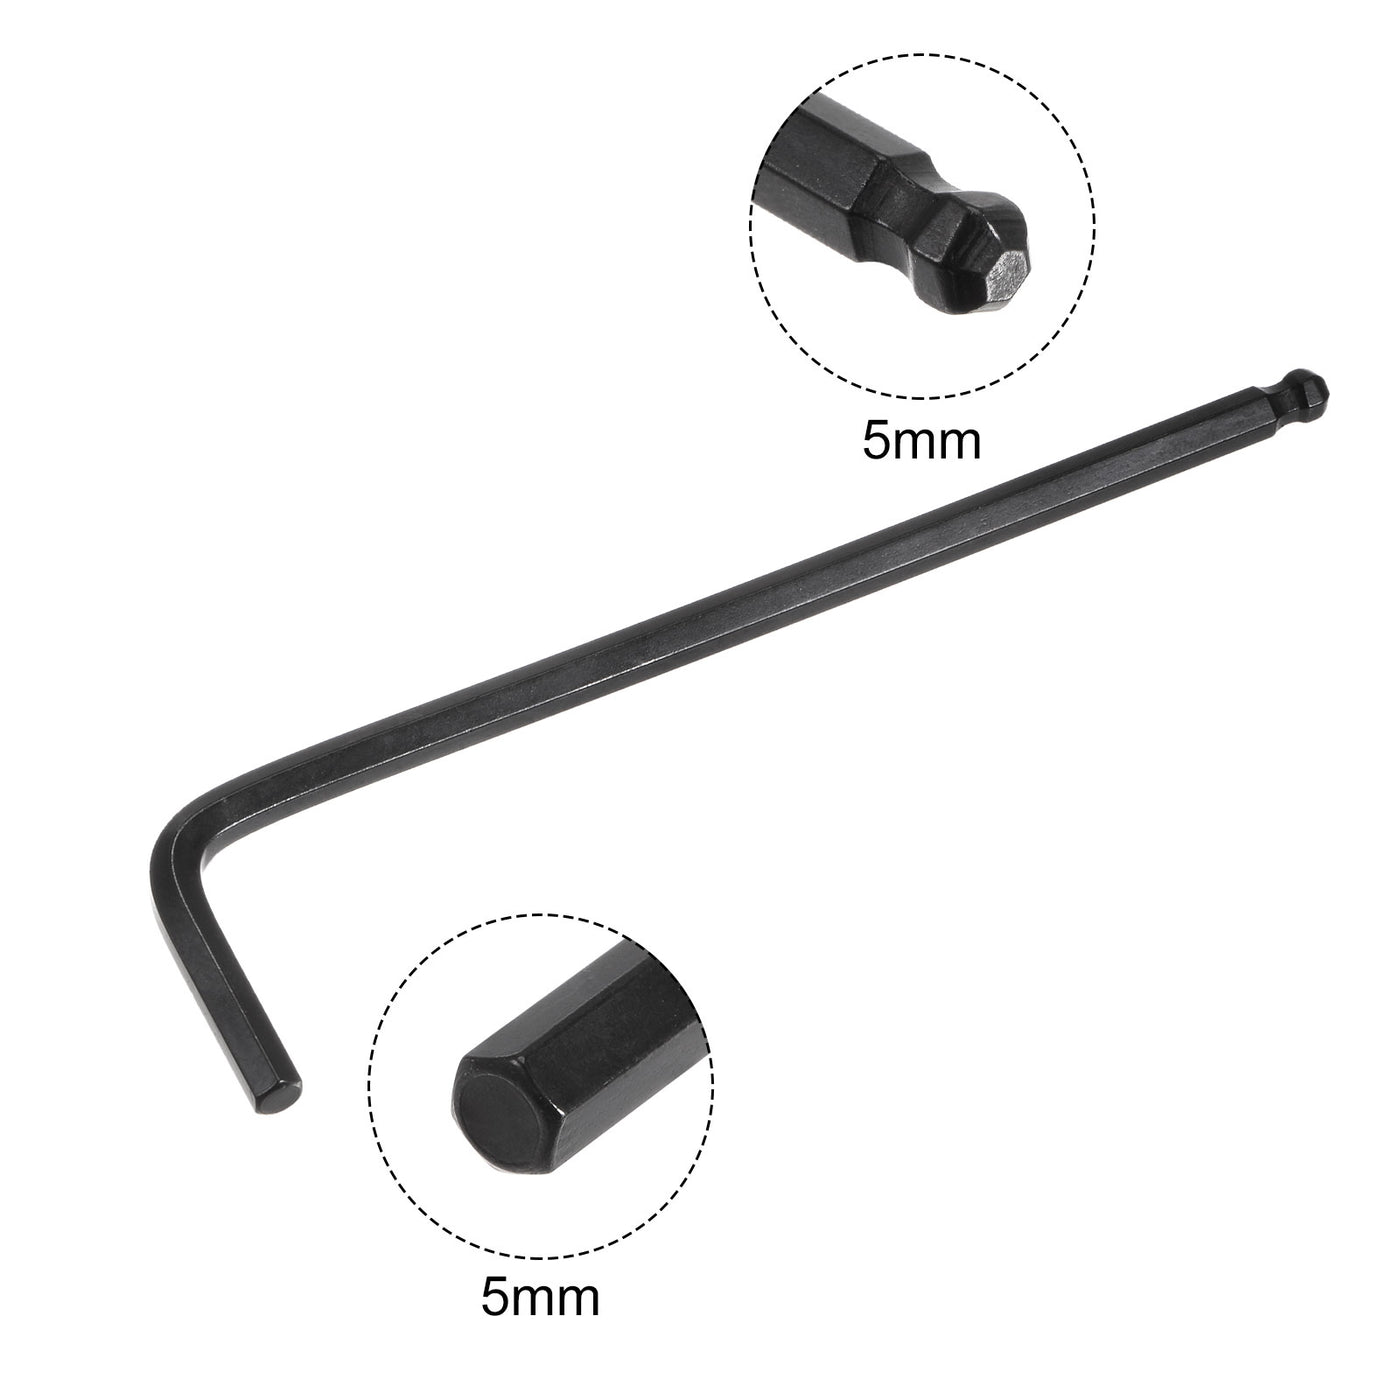 uxcell Uxcell 5mm Ball End Hex Key Wrench, L Shaped Long Arm CR-V Repairing Tool, Black